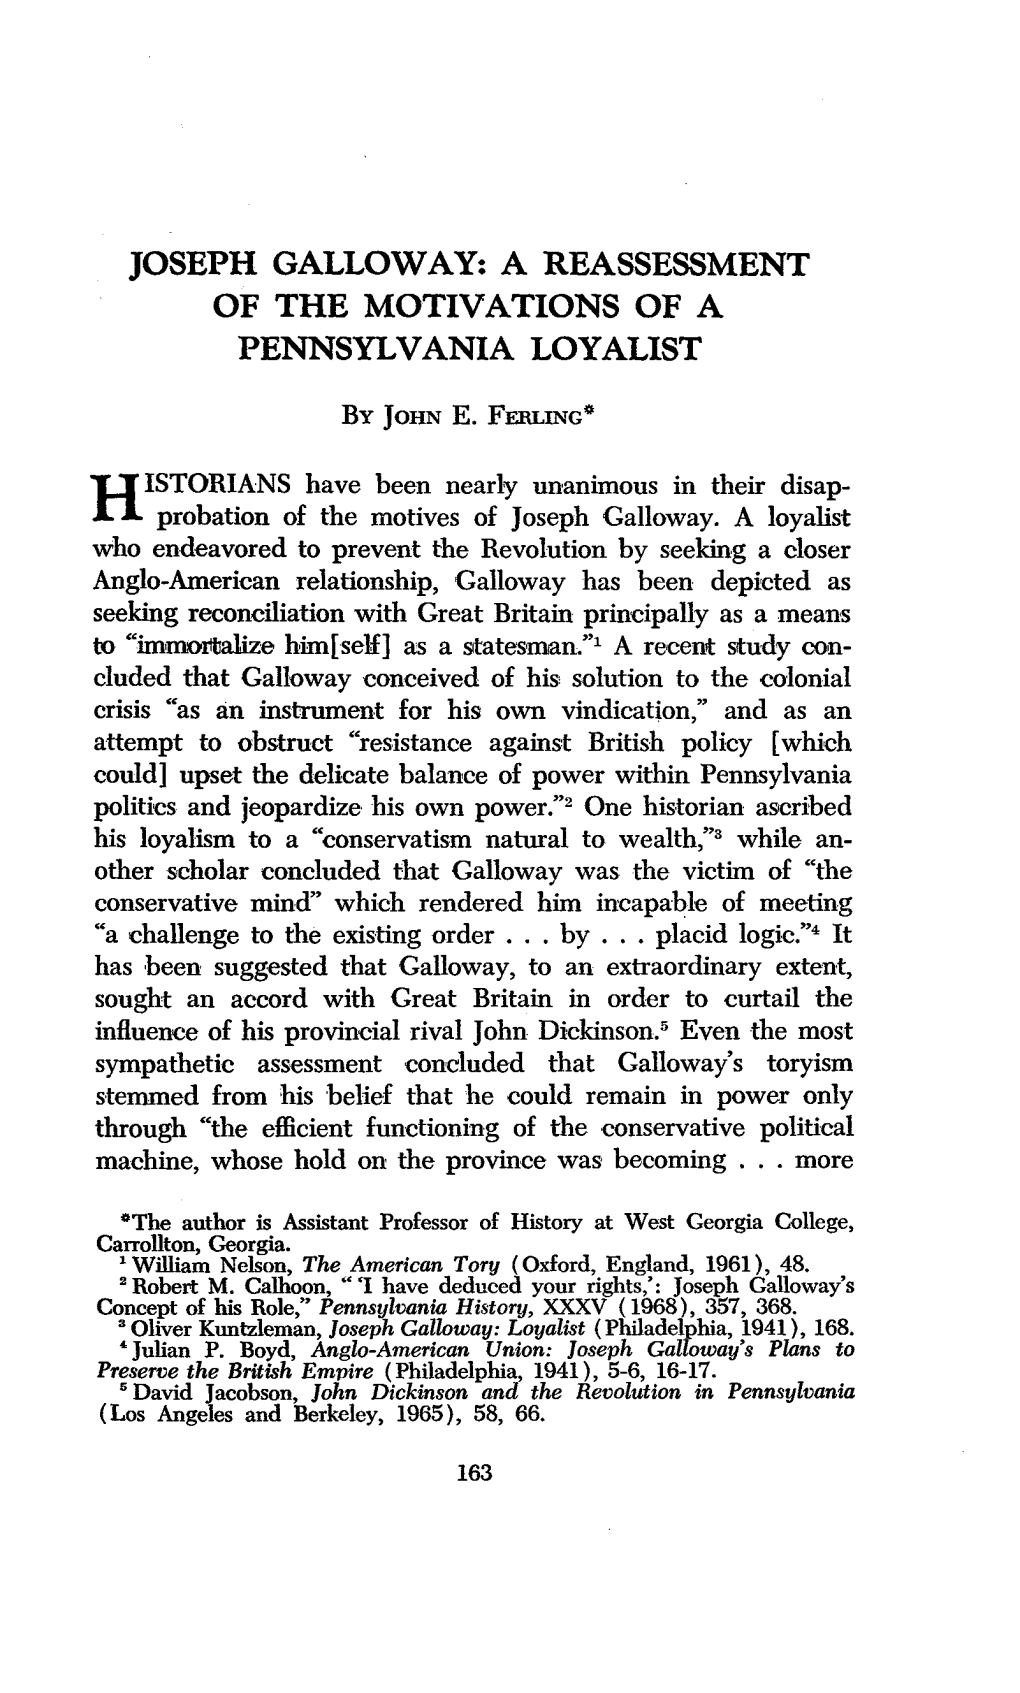 Joseph Galloway: a Reassessment of the Motivations of a Pennsylvania Loyalist